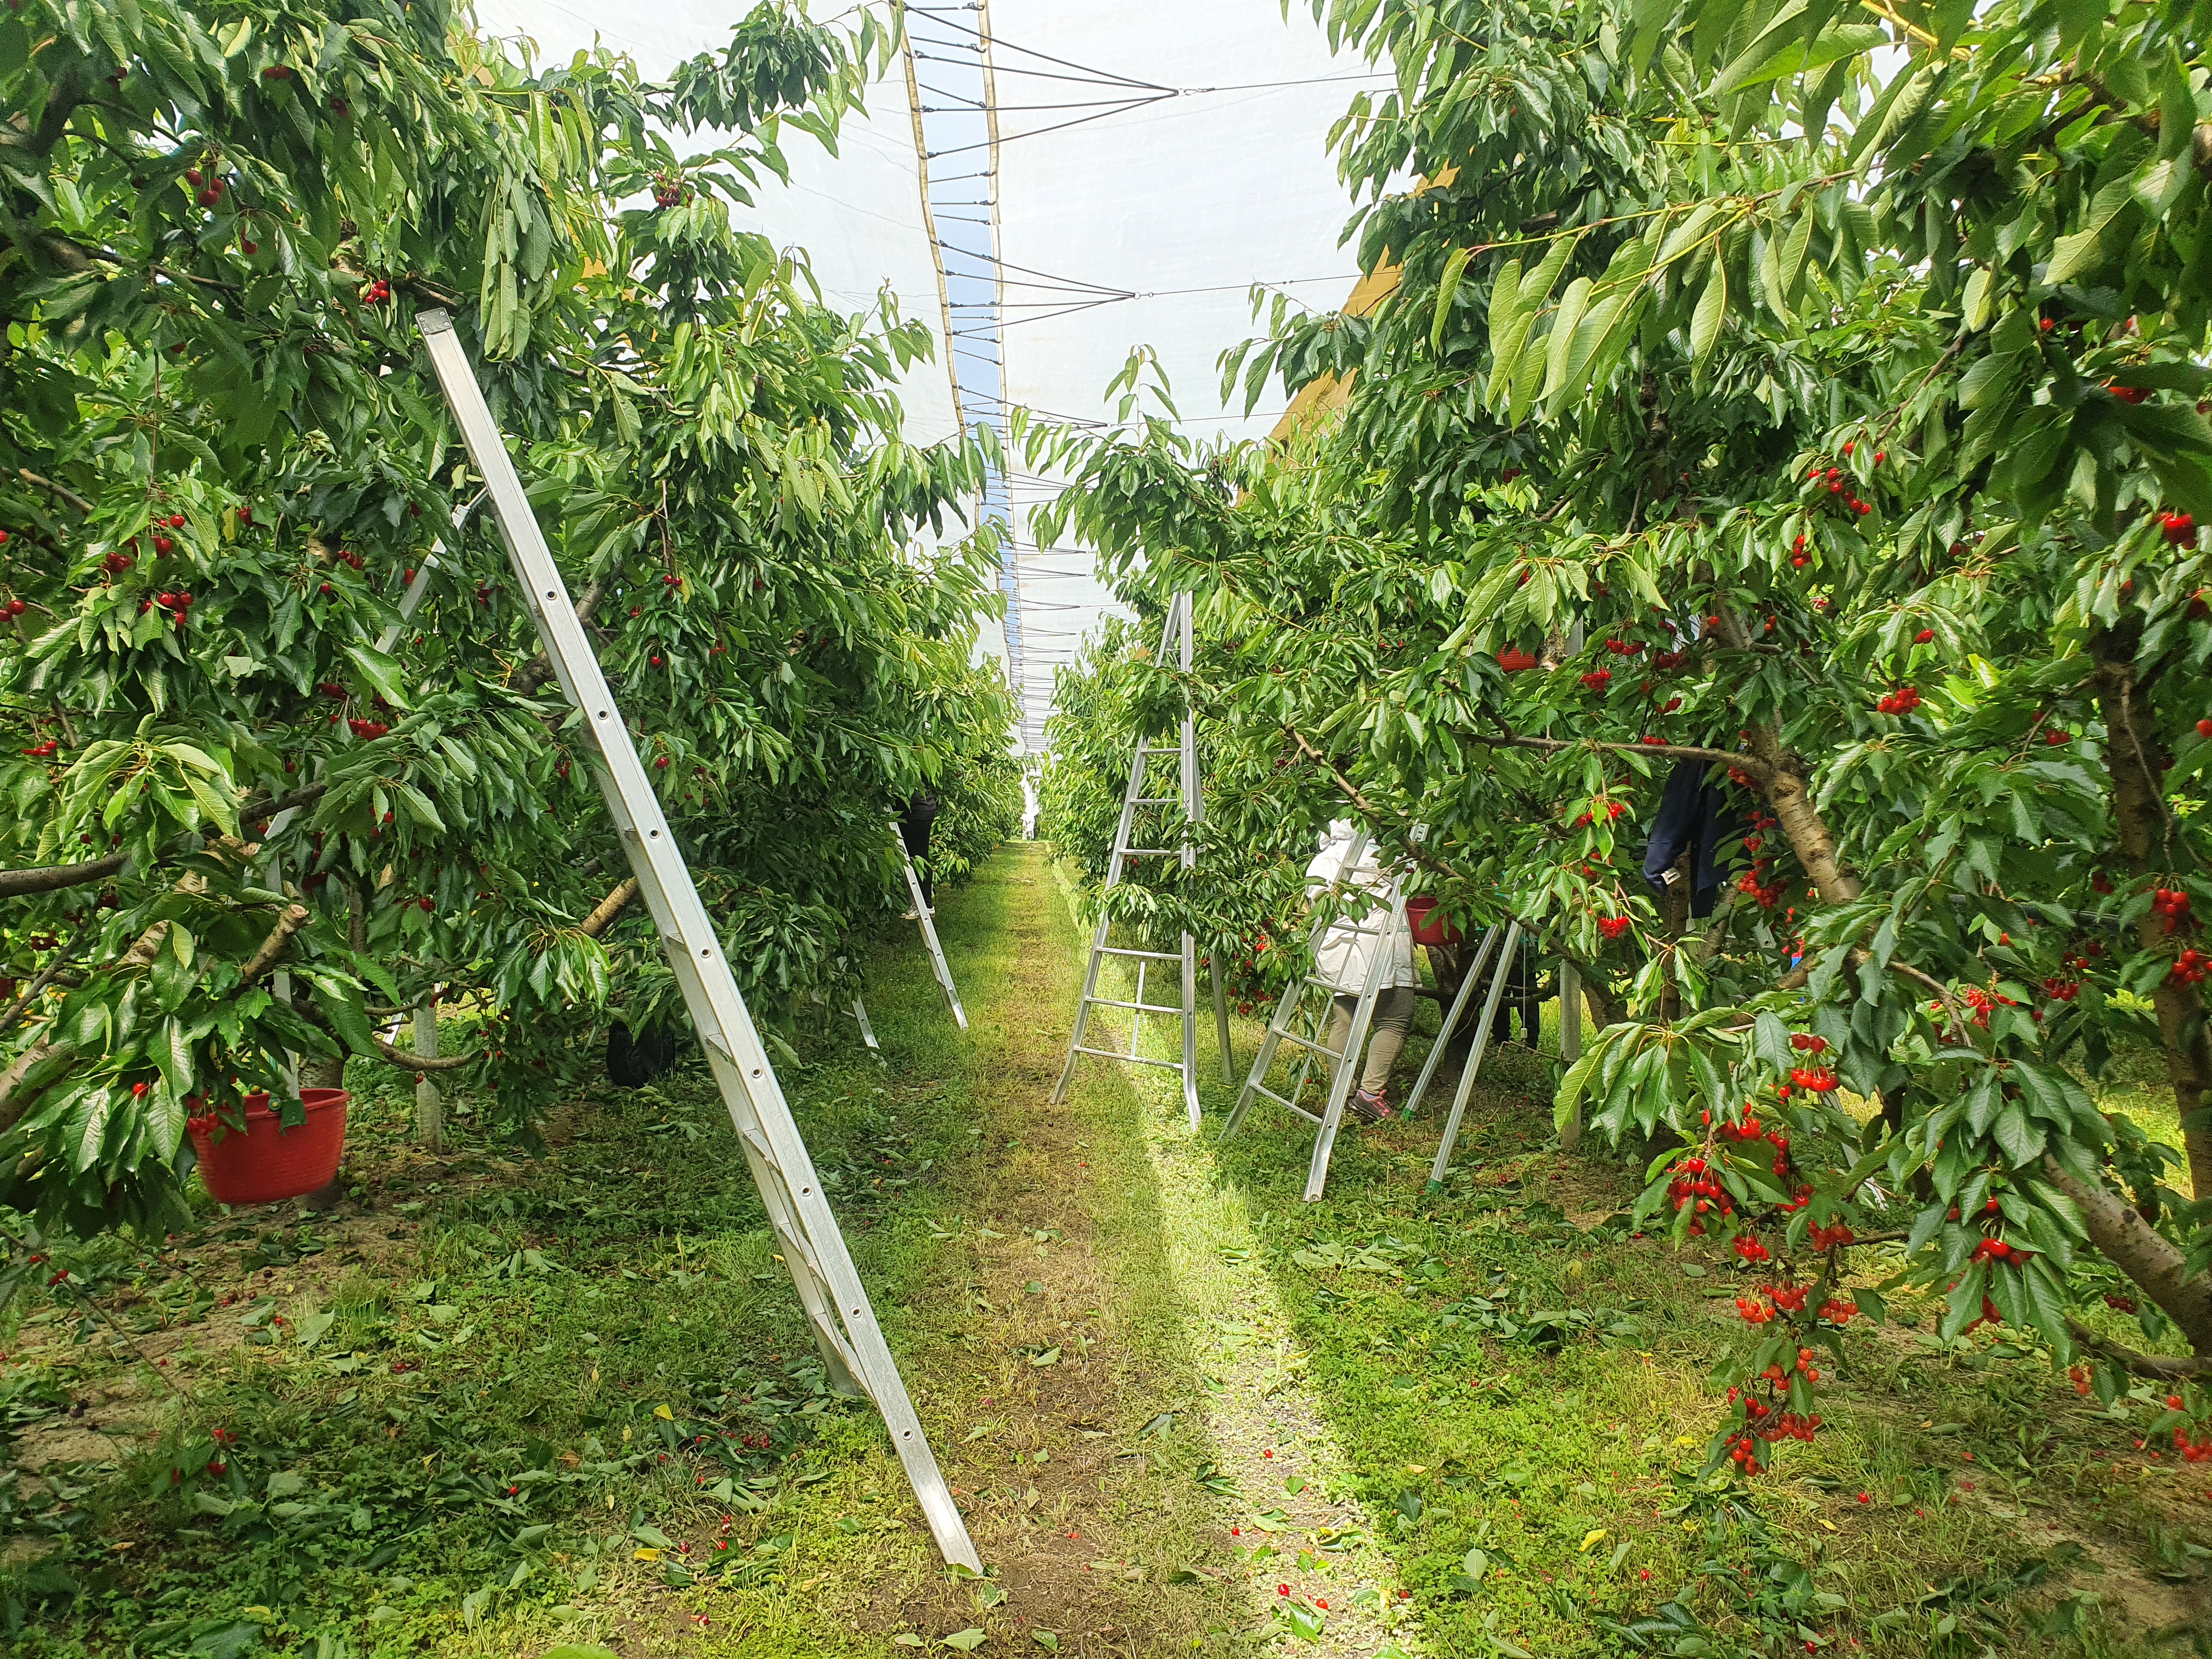 Costs and profitability of cherry growing at different planting densities